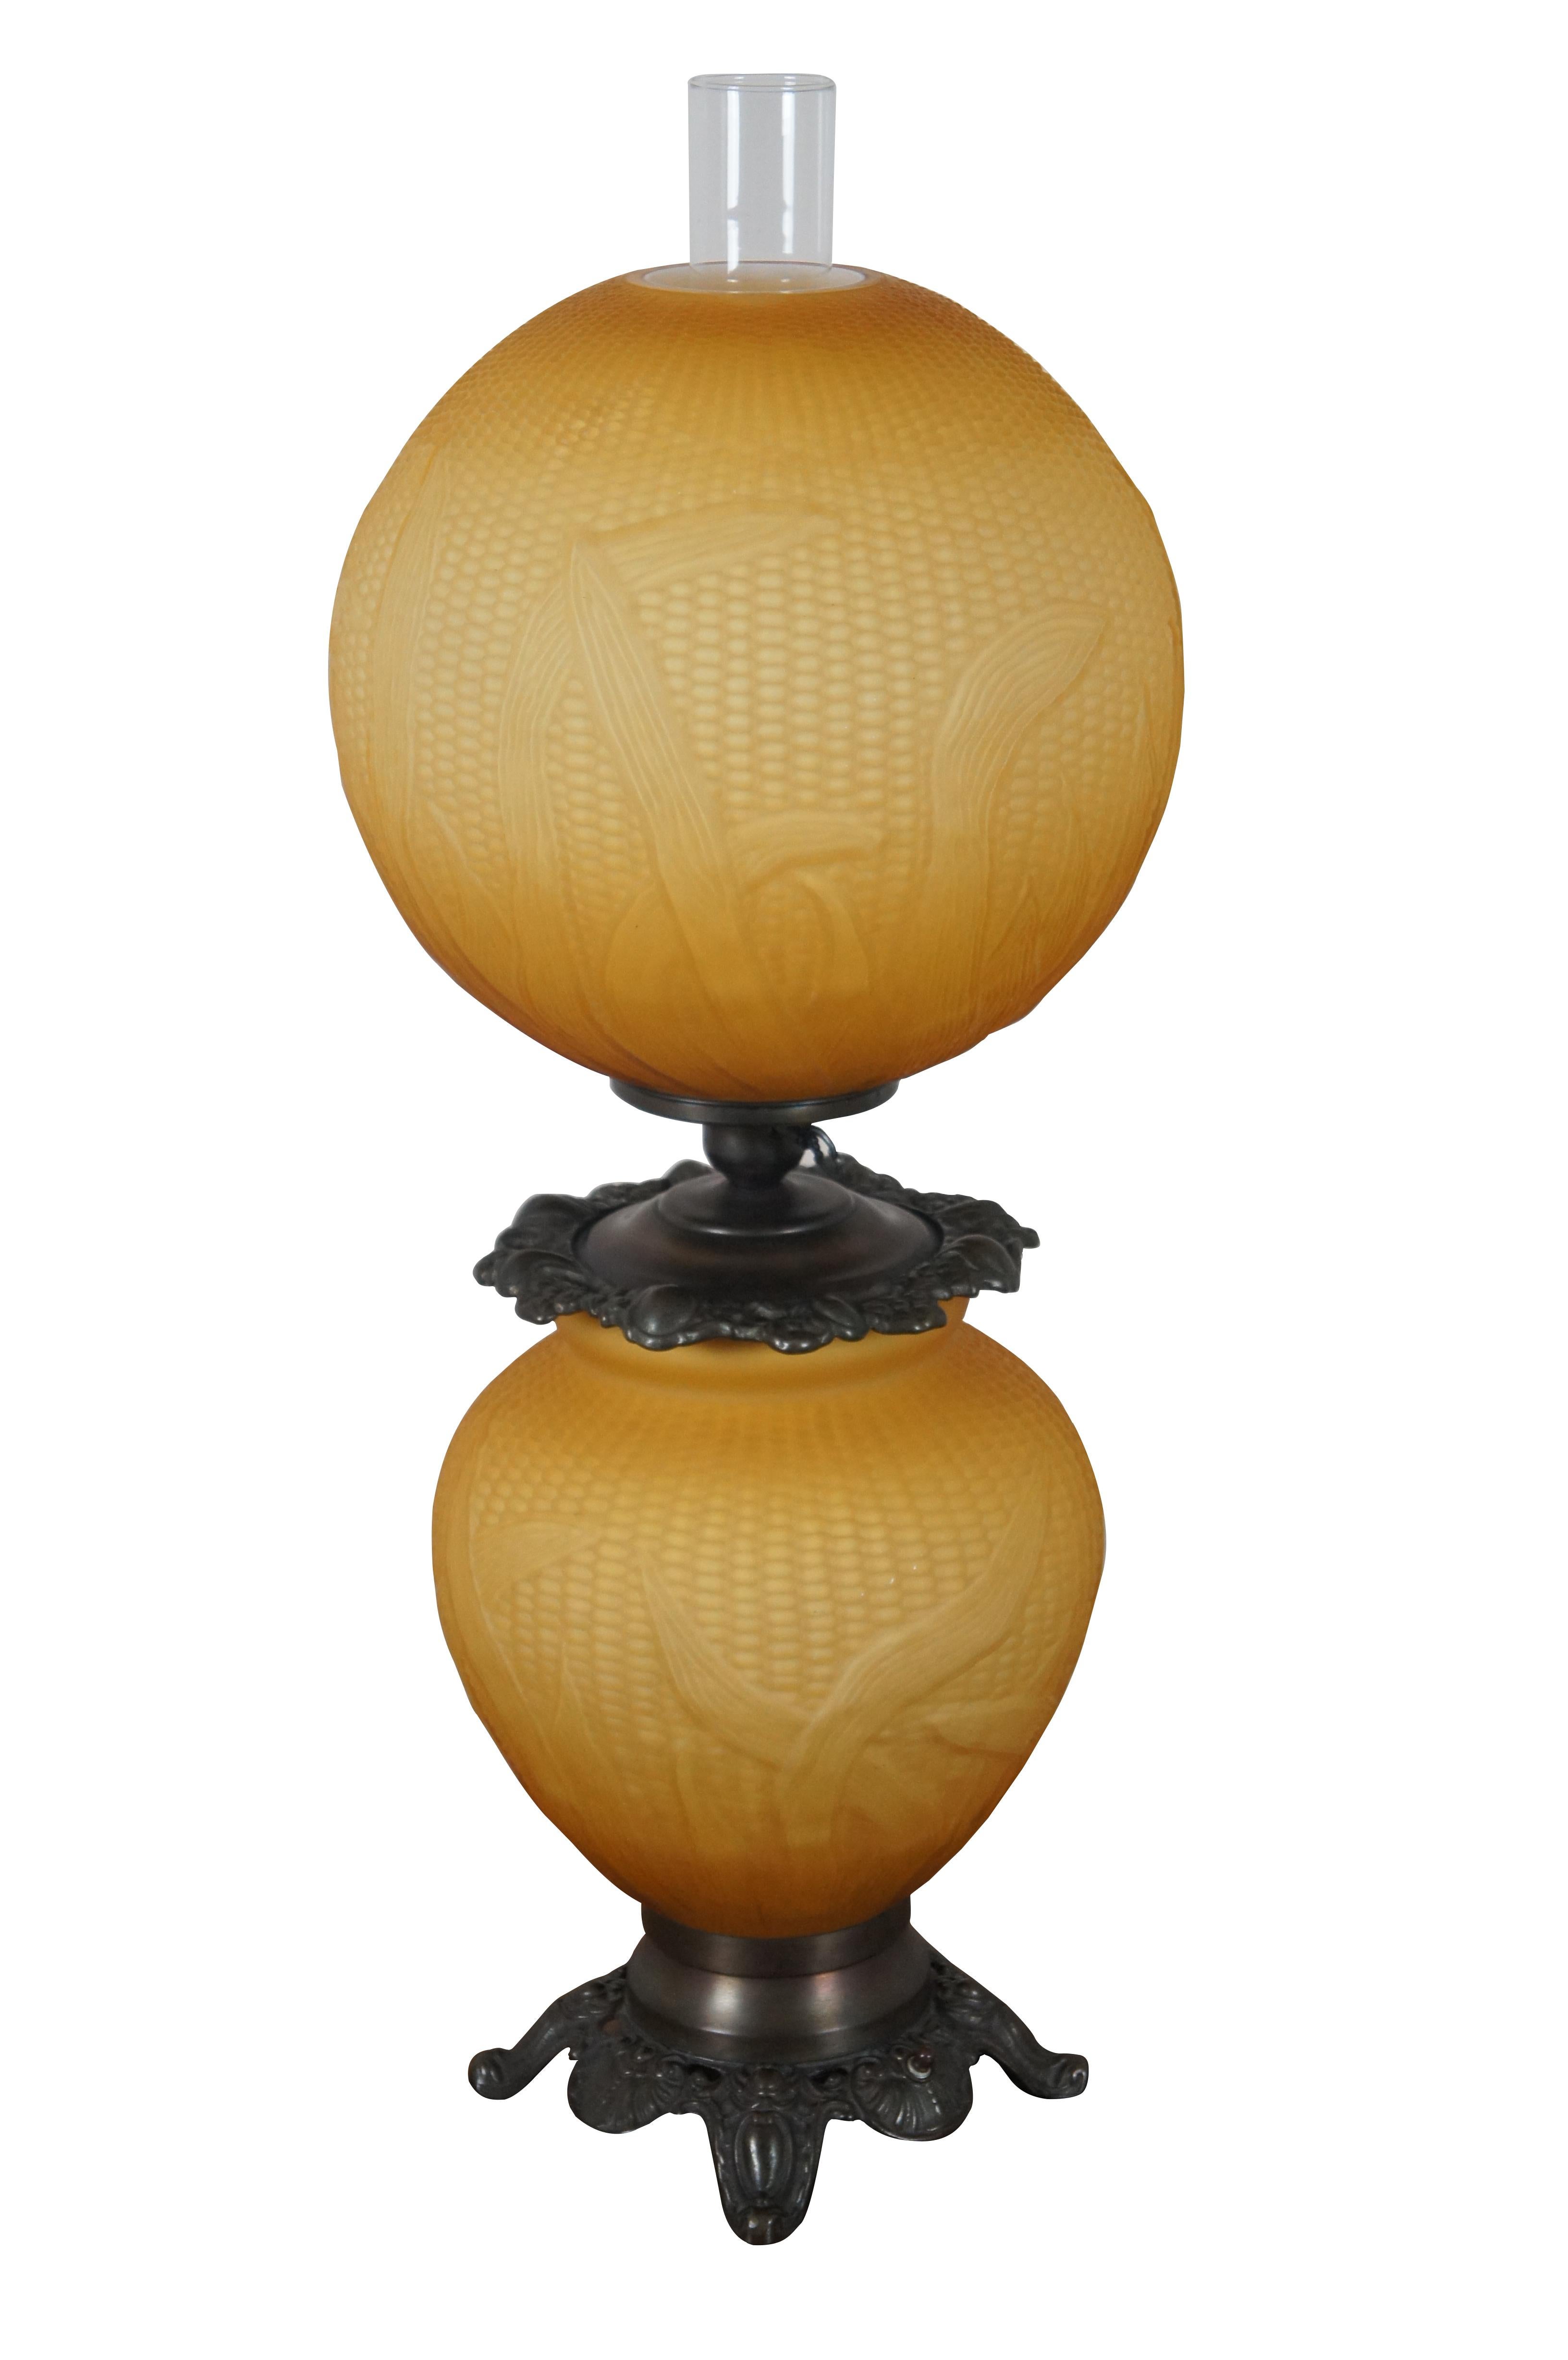 Very rare and impressive Antique Victorian Gone with the Wind yellow satin glass double globe (converted to electric) parlor oil table lamp / lantern with hurricane and a molded corn cob / maze pattern with leaves. Marked BC-4-W on base. Three way